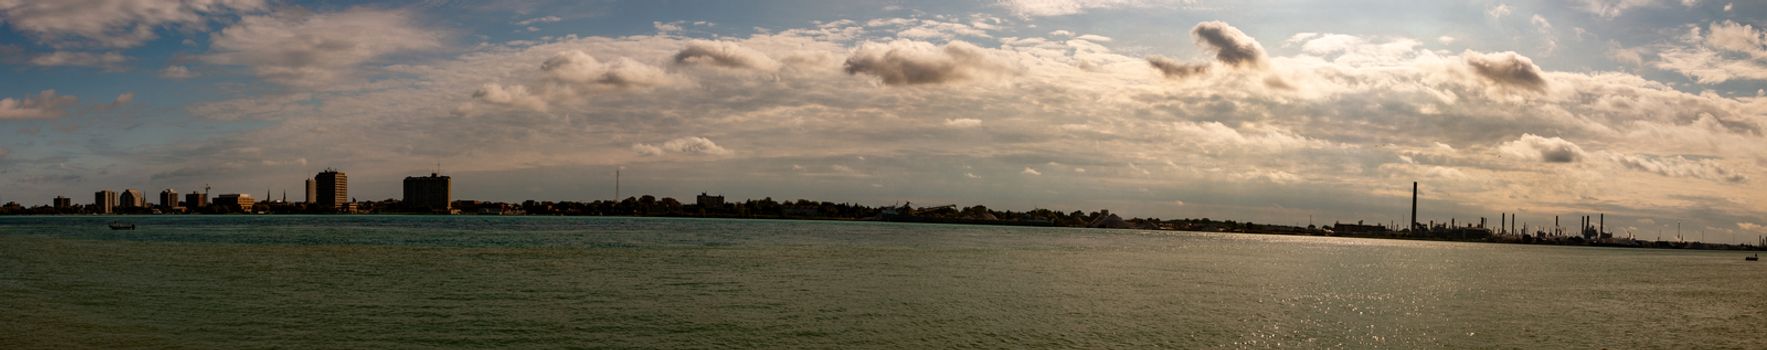 Port Huron Michigan in Panoramic format wide angle to show the industrial skyline